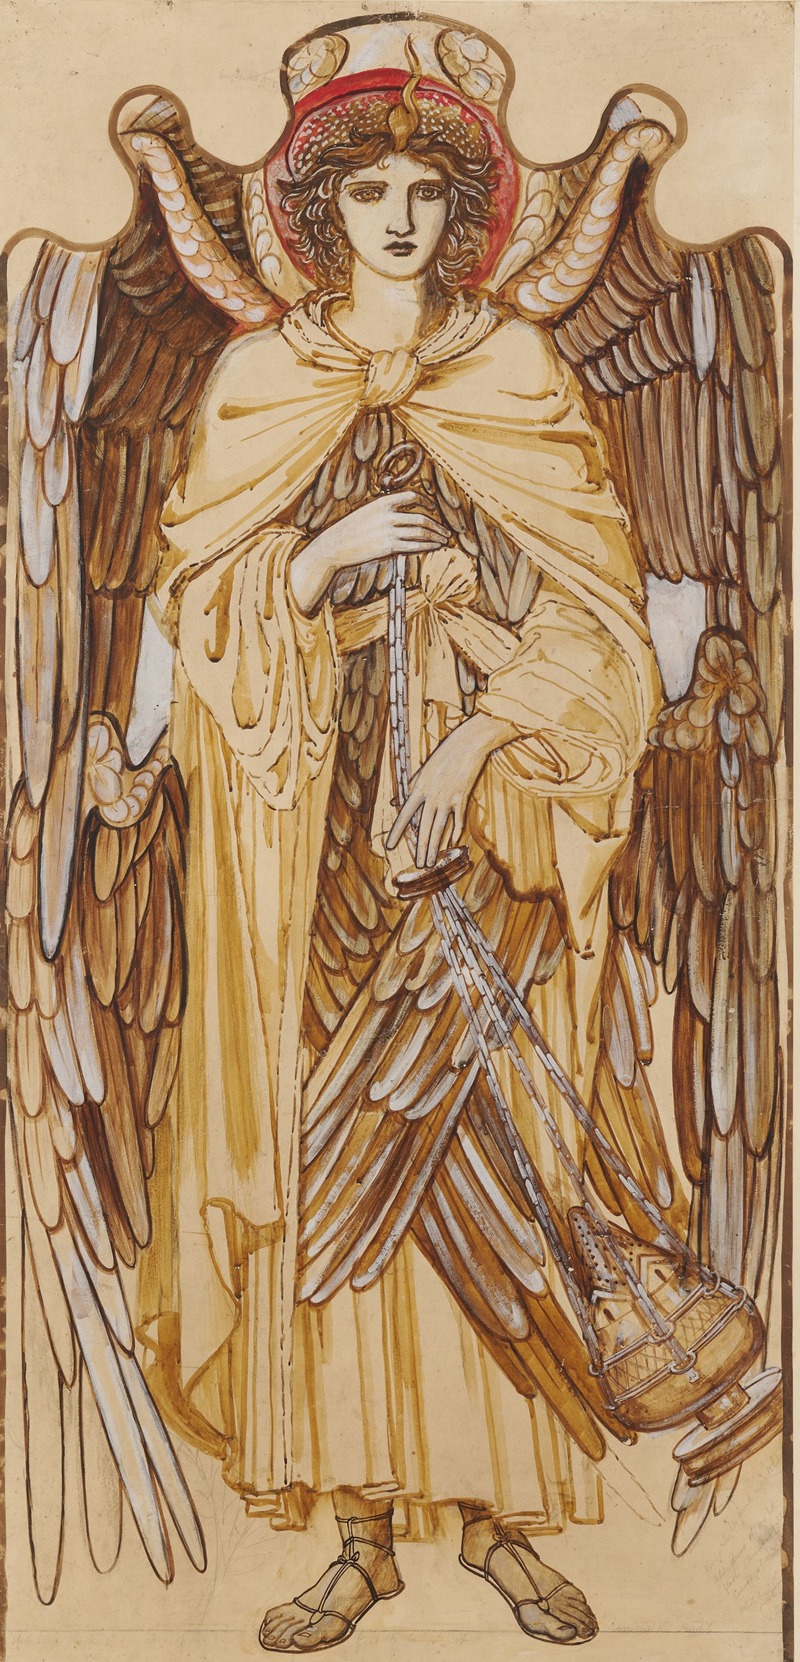 Sir Edward Coley Burne-Jones - The Angels of the Hierarchy – Seraphim